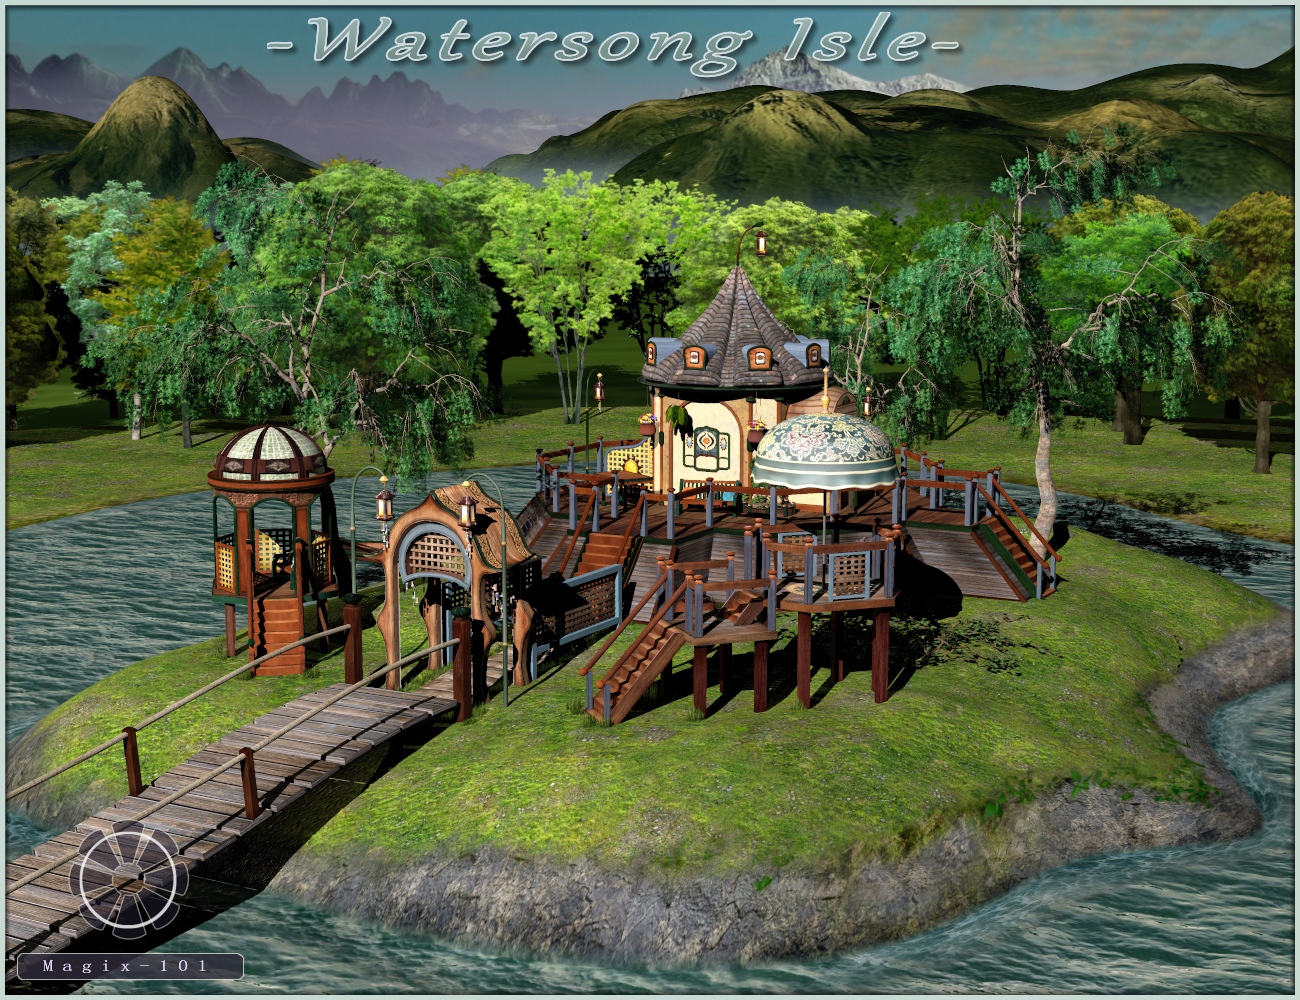 Watersong Isle by: Magix 101, 3D Models by Daz 3D